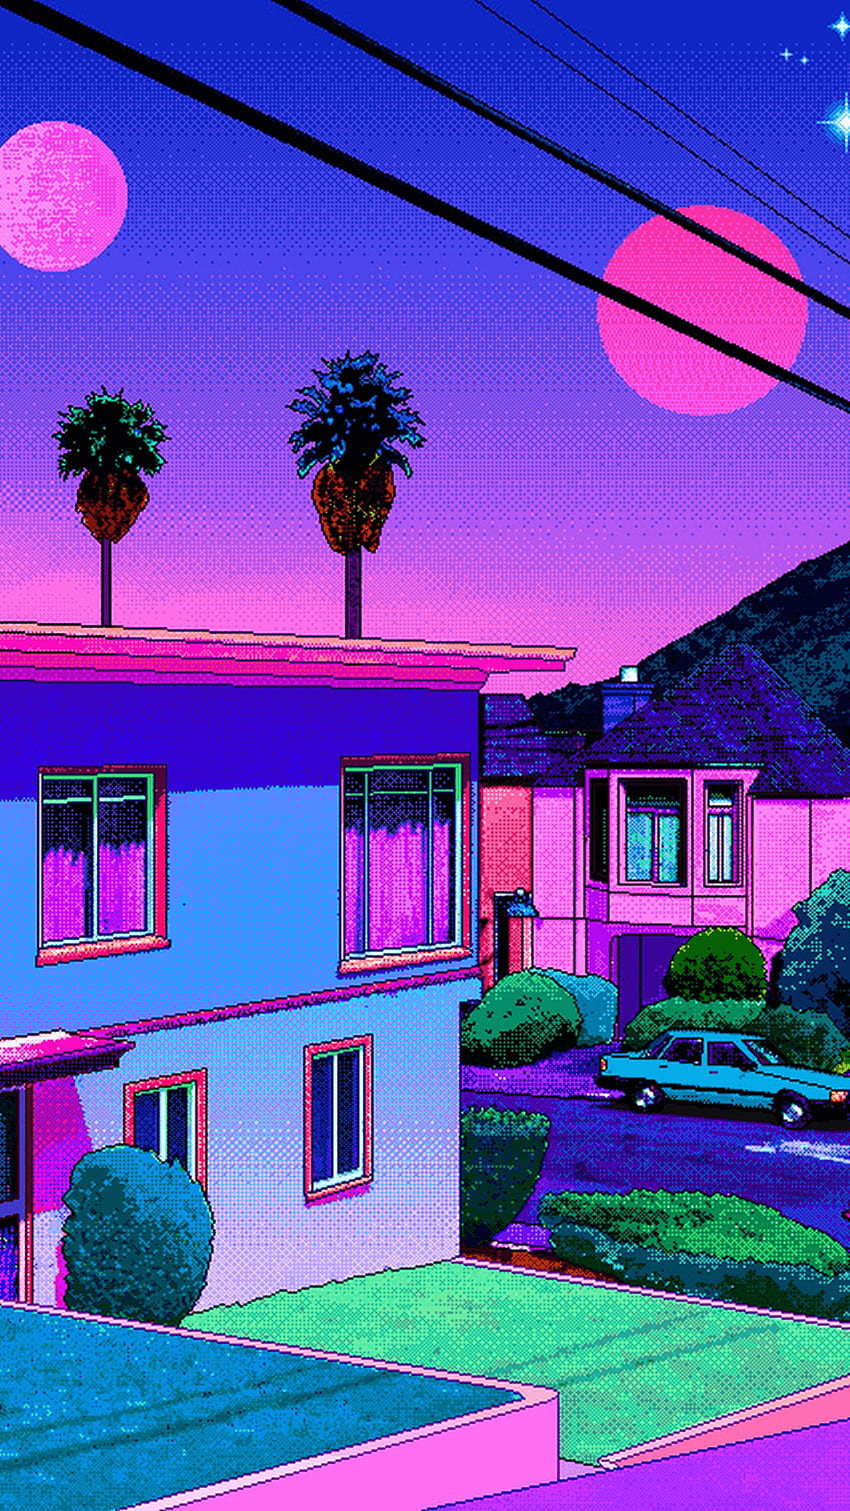 A house with purple and blue colors - 90s, anime, 90s anime